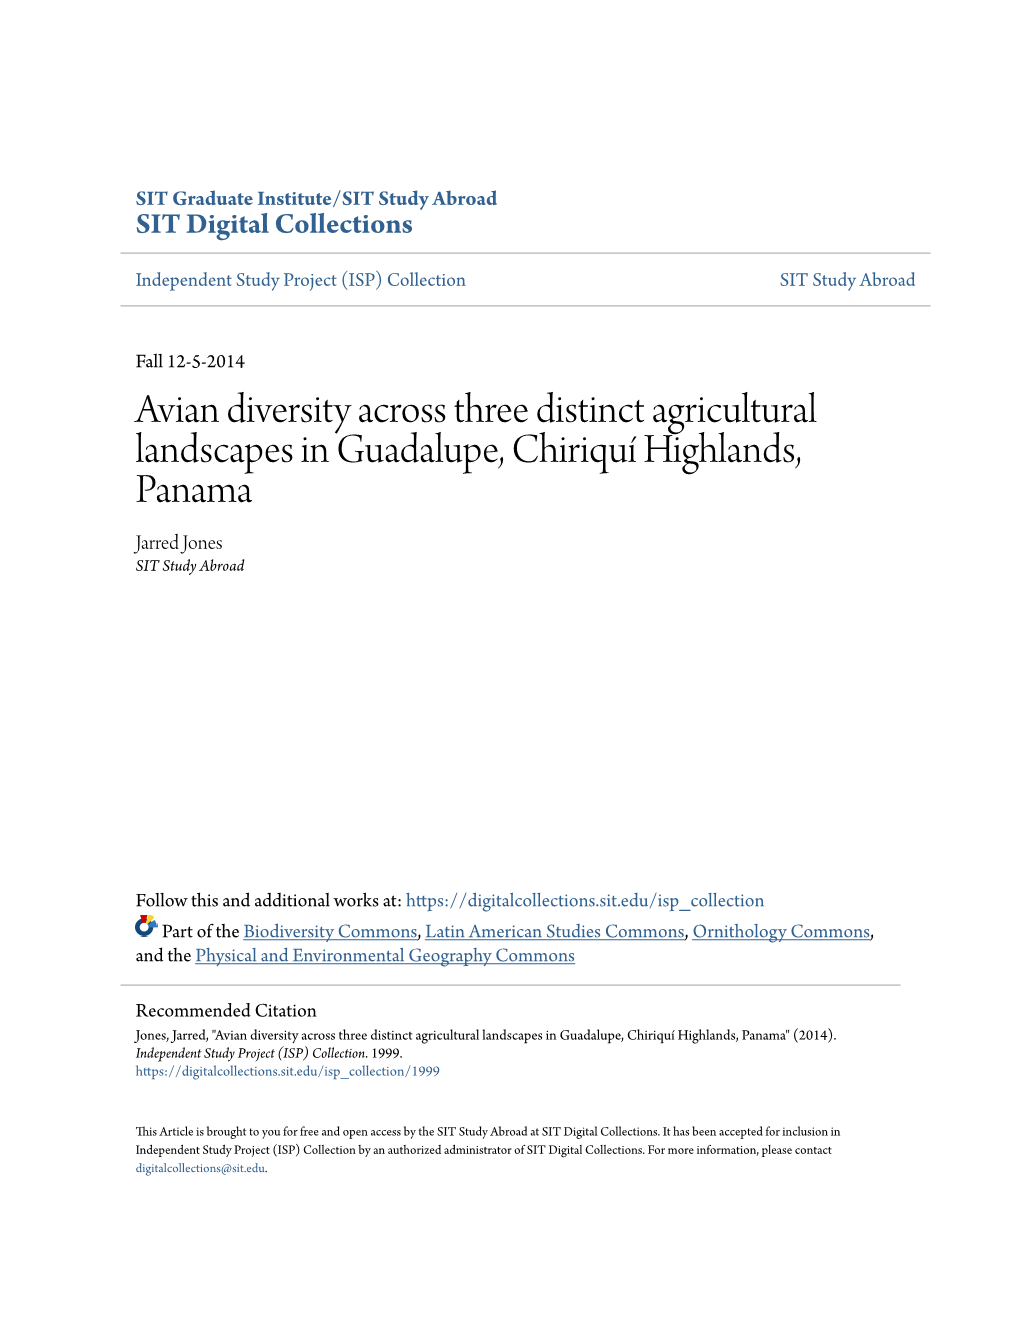 Avian Diversity Across Three Distinct Agricultural Landscapes in Guadalupe, Chiriquí Highlands, Panama Jarred Jones SIT Study Abroad